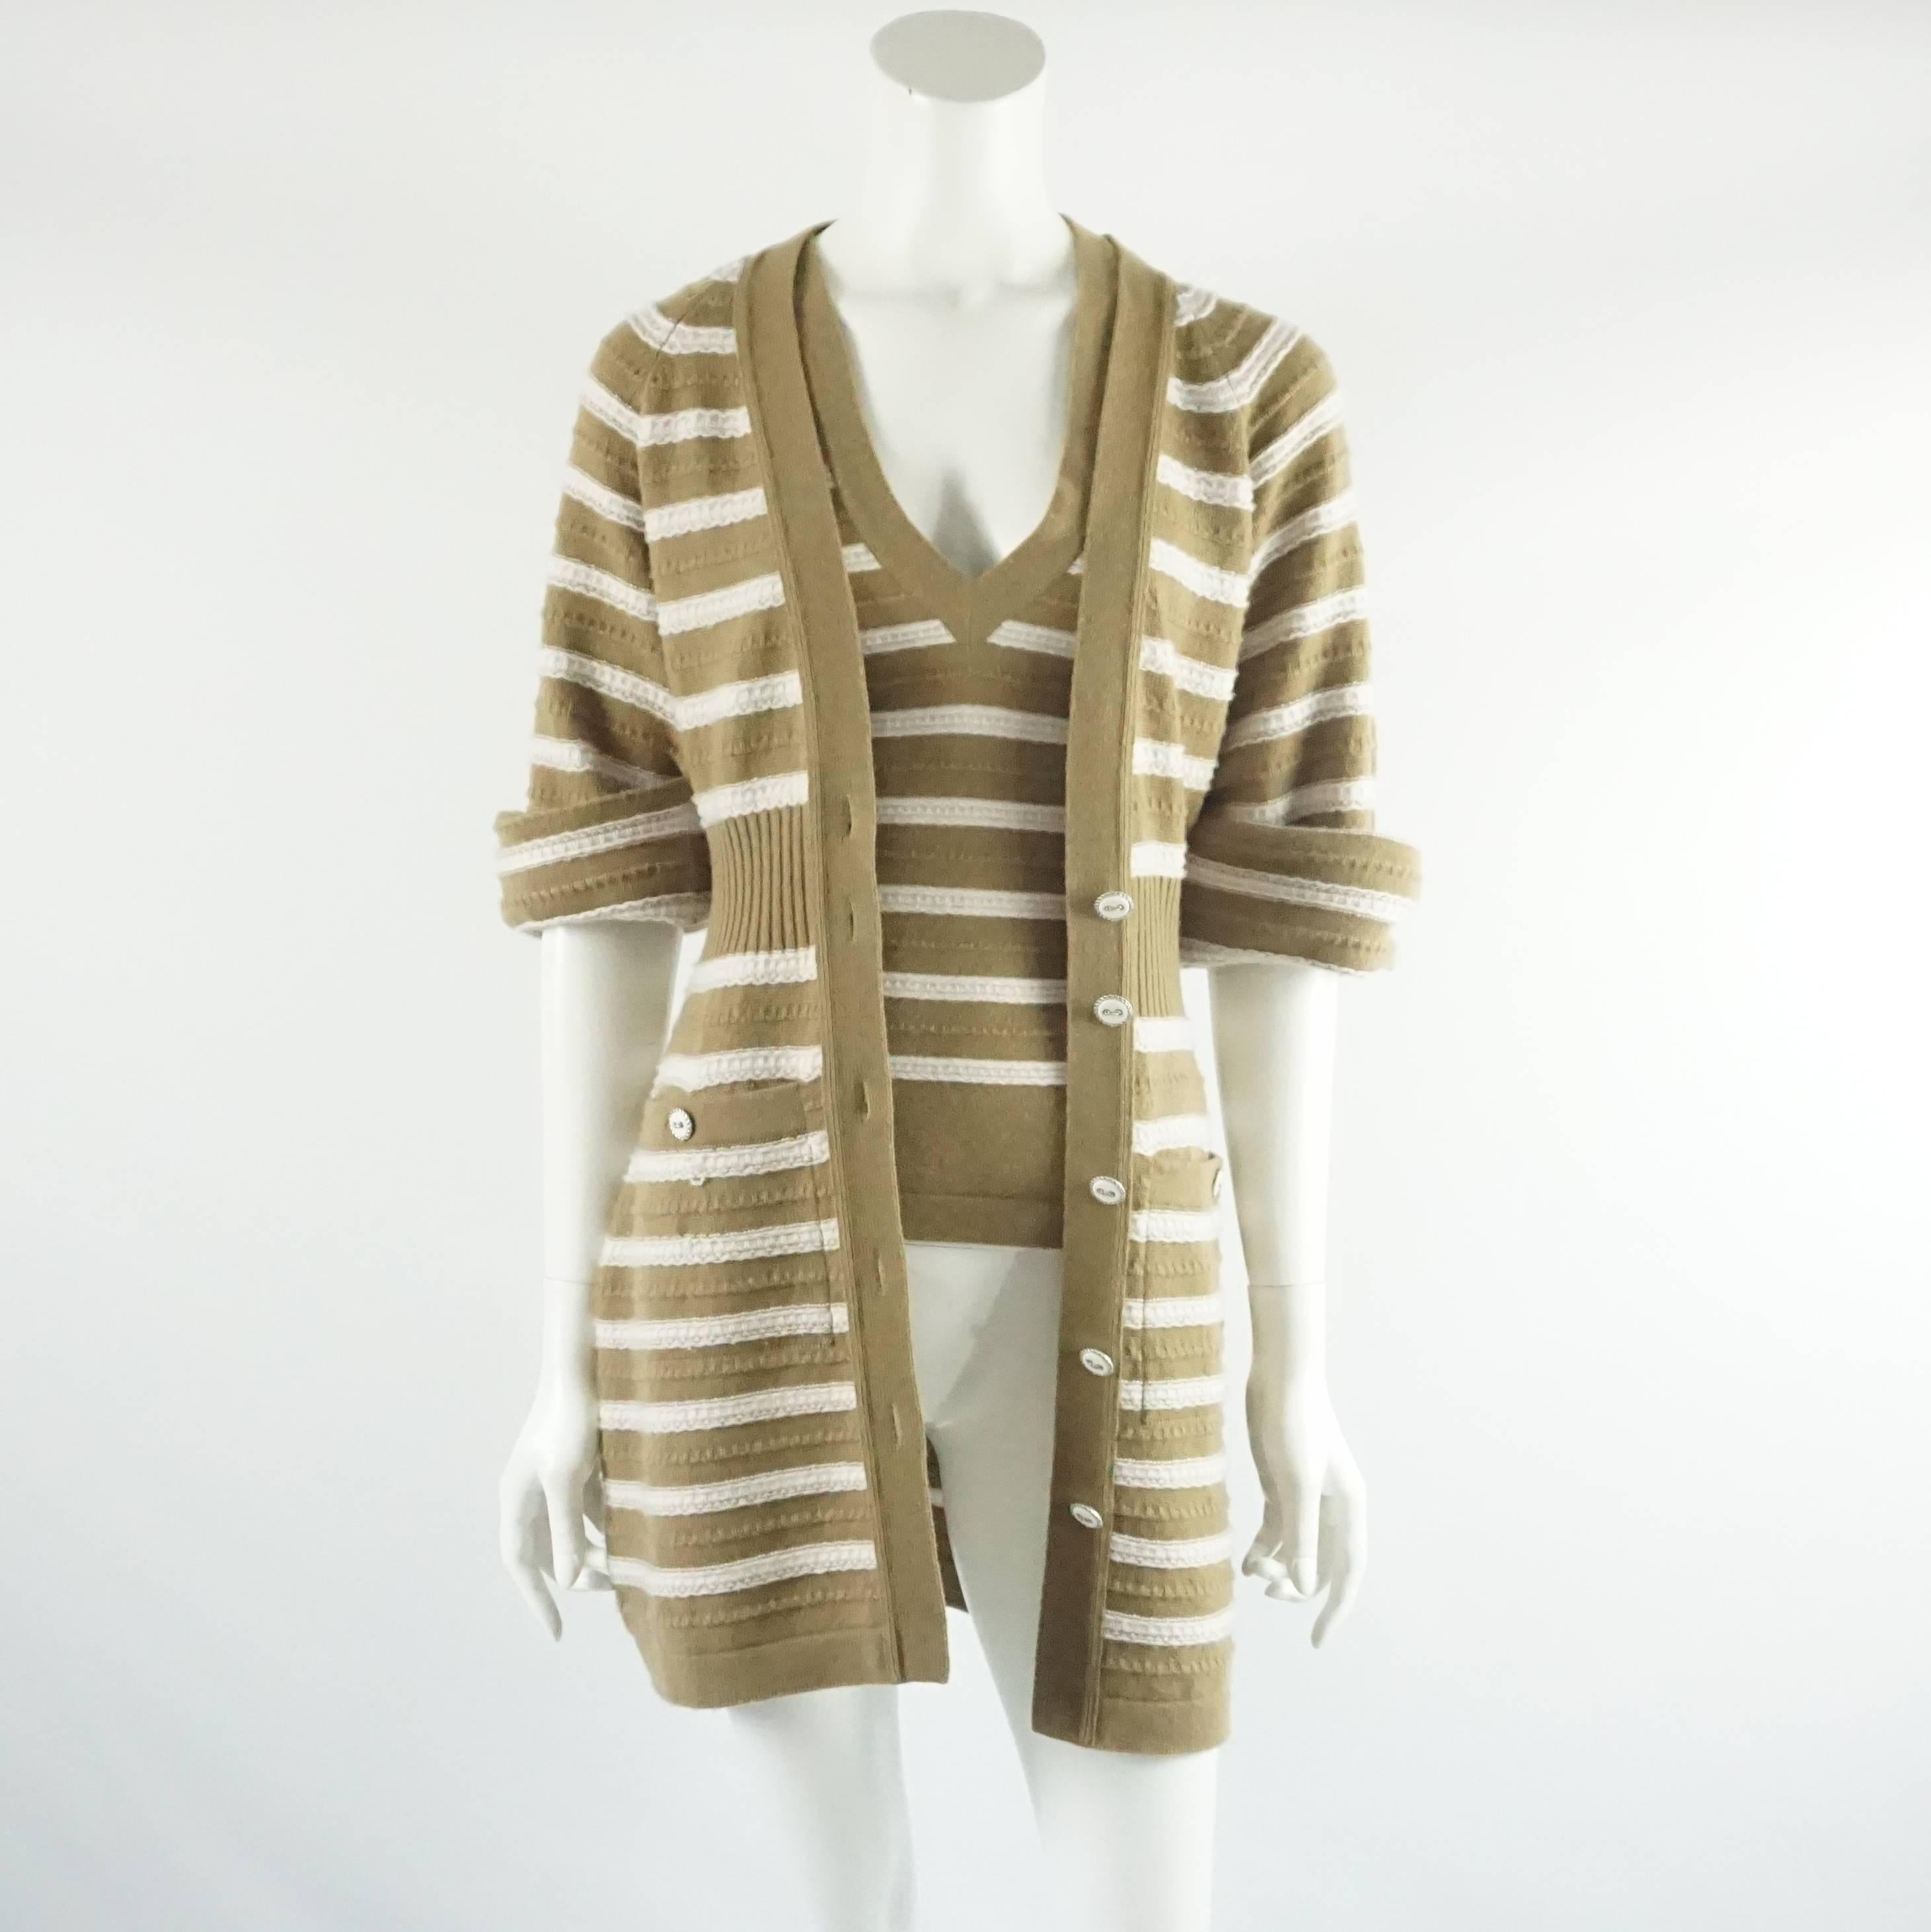 This classic Chanel set is a striped camel and ivory cashmere. The set comes with a sweater dress that can be worn both ways. It has a textured fabric, cinched waist, ivory enamel buttons, 2 front pockets, and rolled sleeves attached with a stitch.